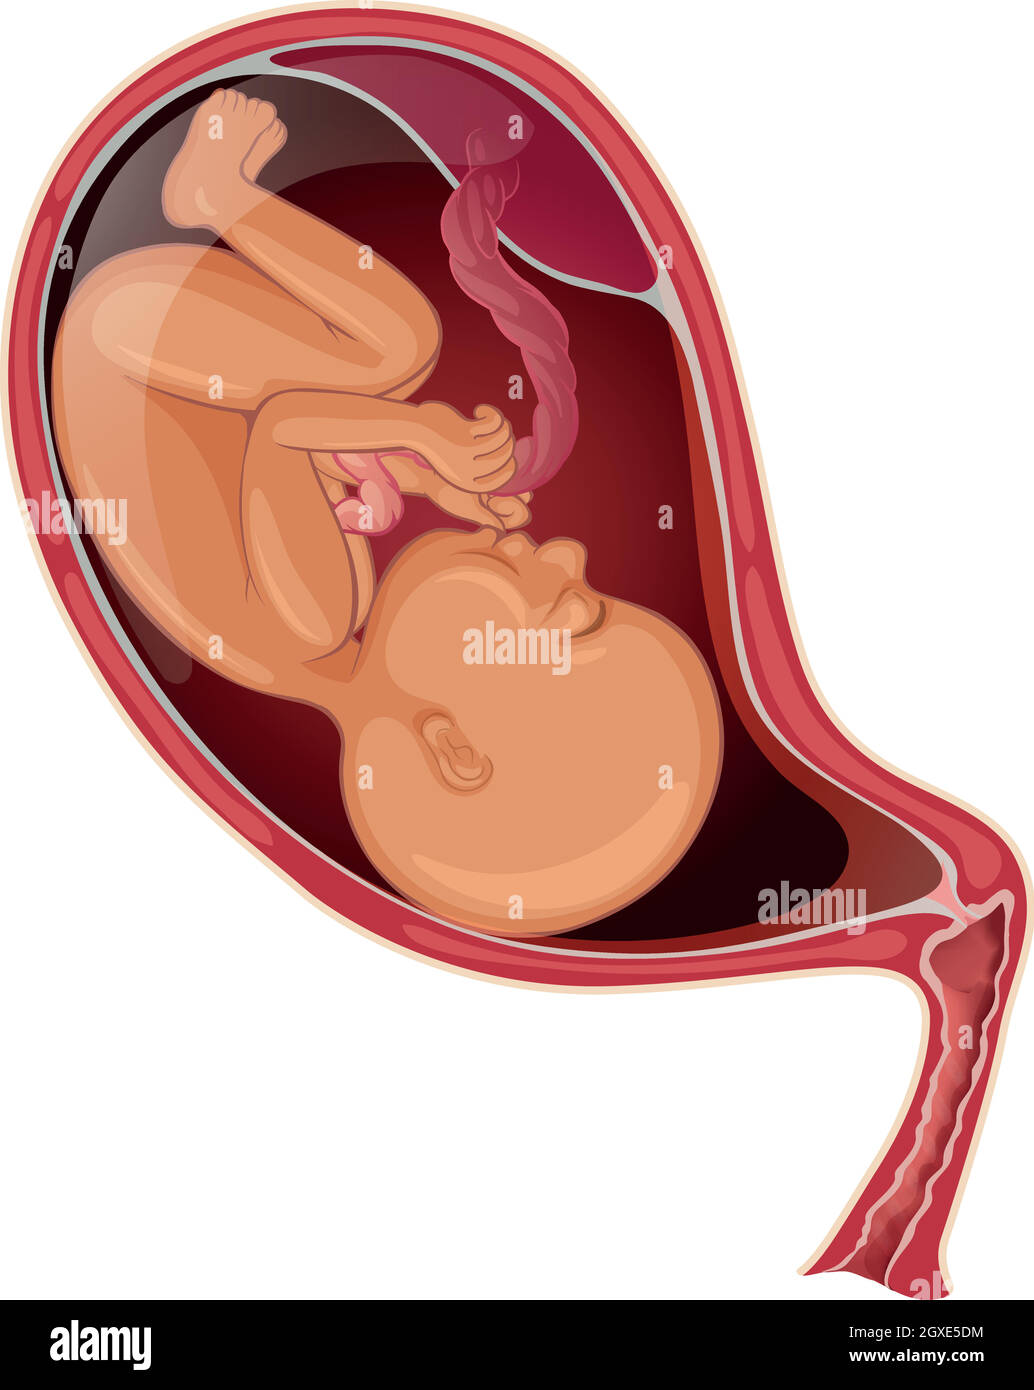 Baby in womb of pregnant woman Stock Vector